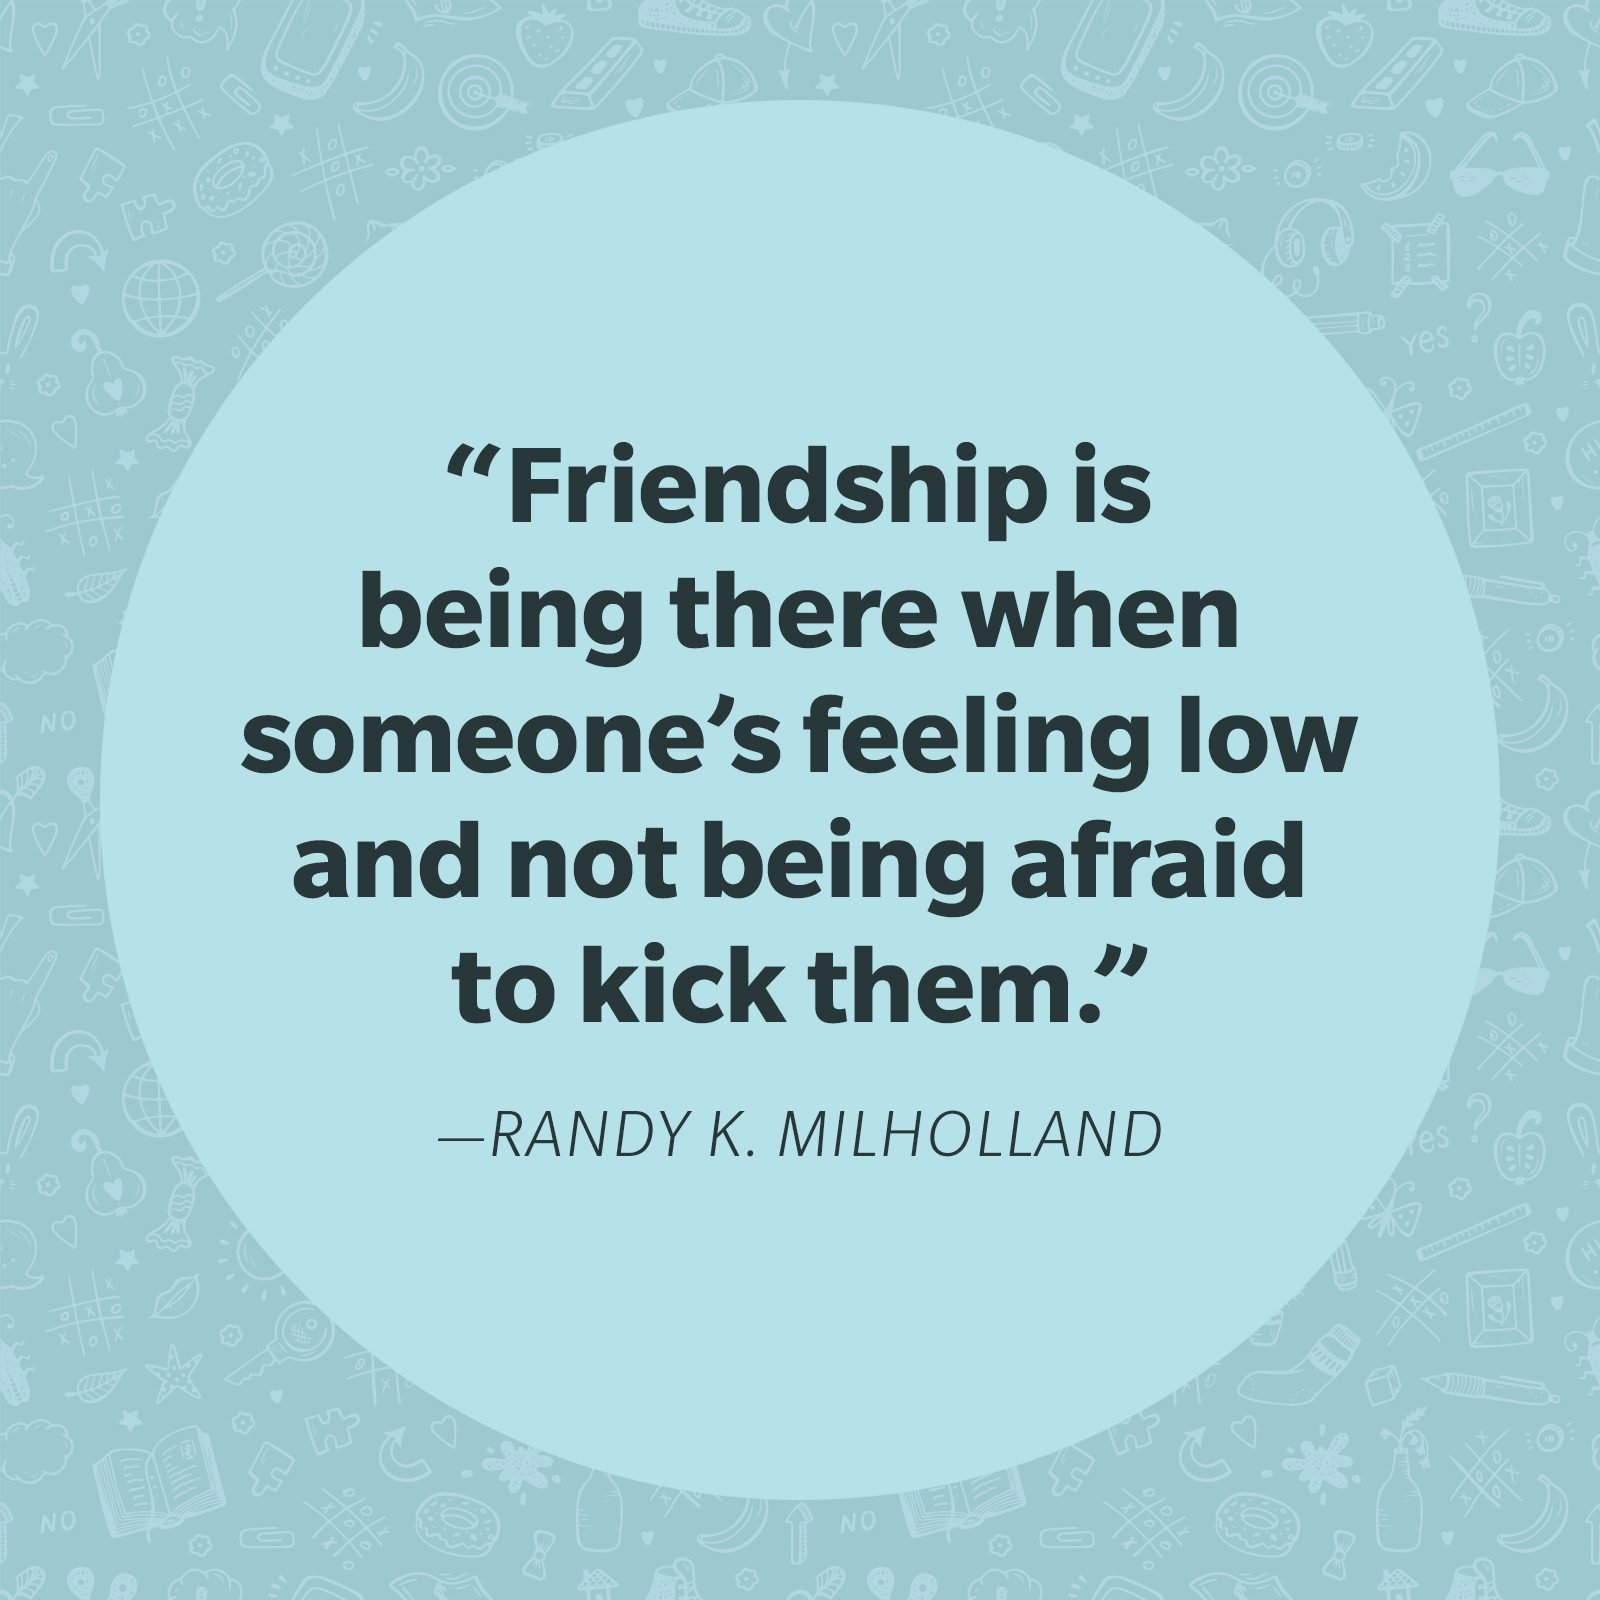 35 Funny Friendship Quotes to Share with Your Friends